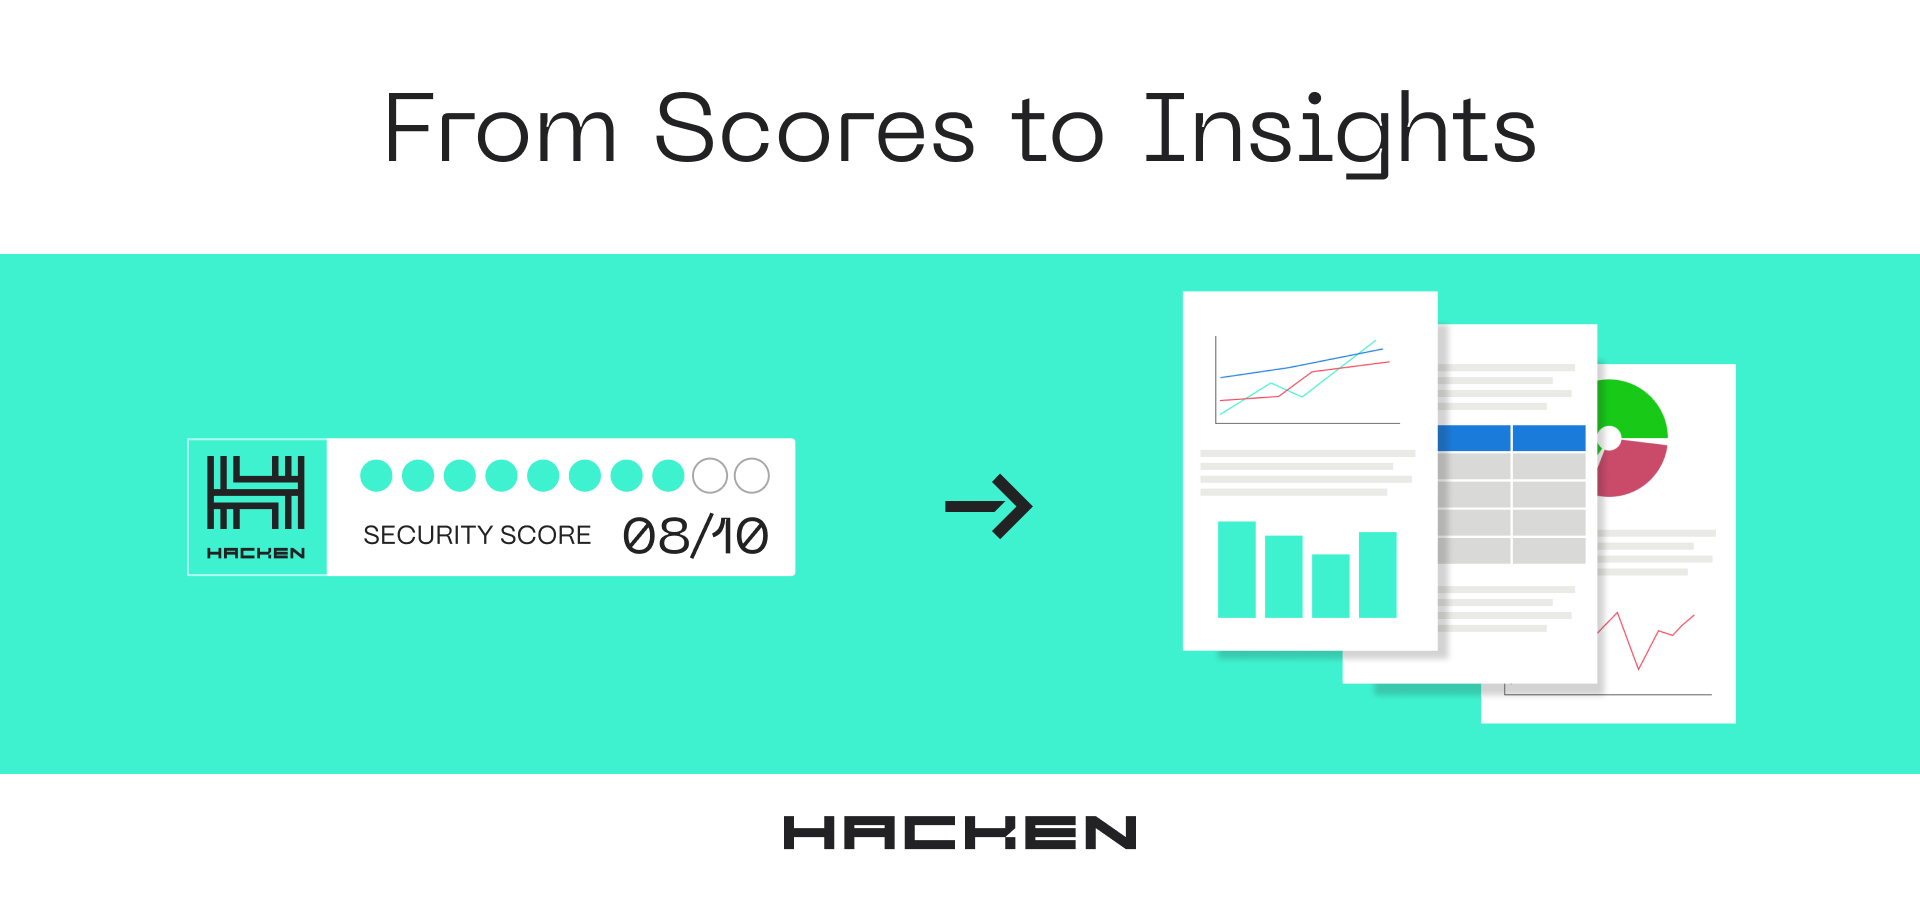 Hacken Announces Elimination of Security Scores in Audits